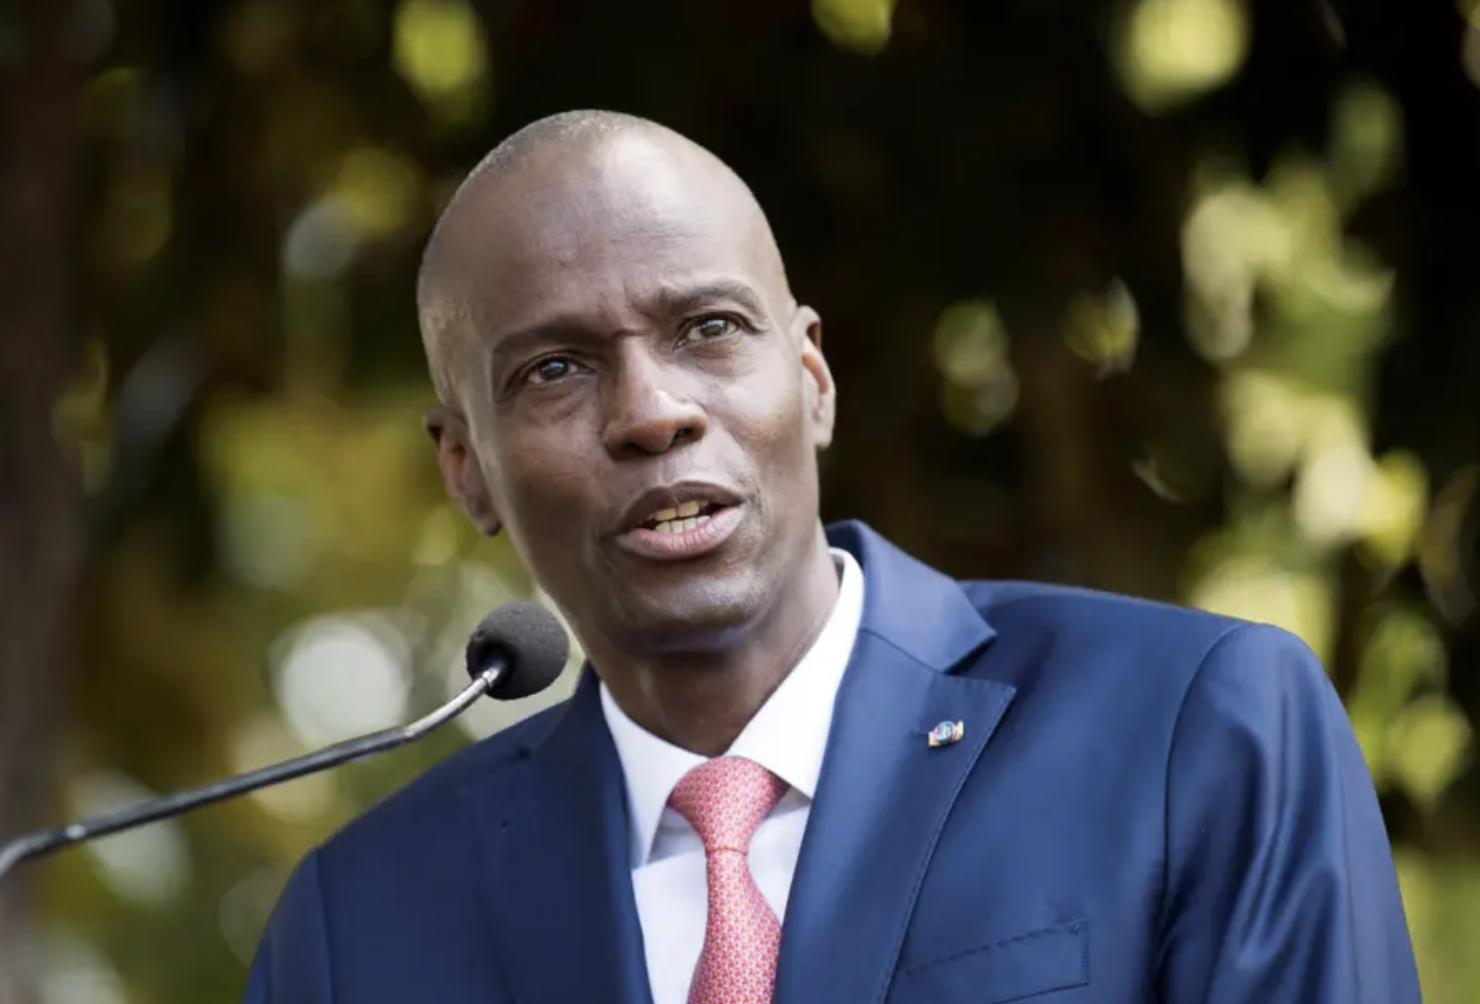 Haiti’s president has been assassinated in his private residence